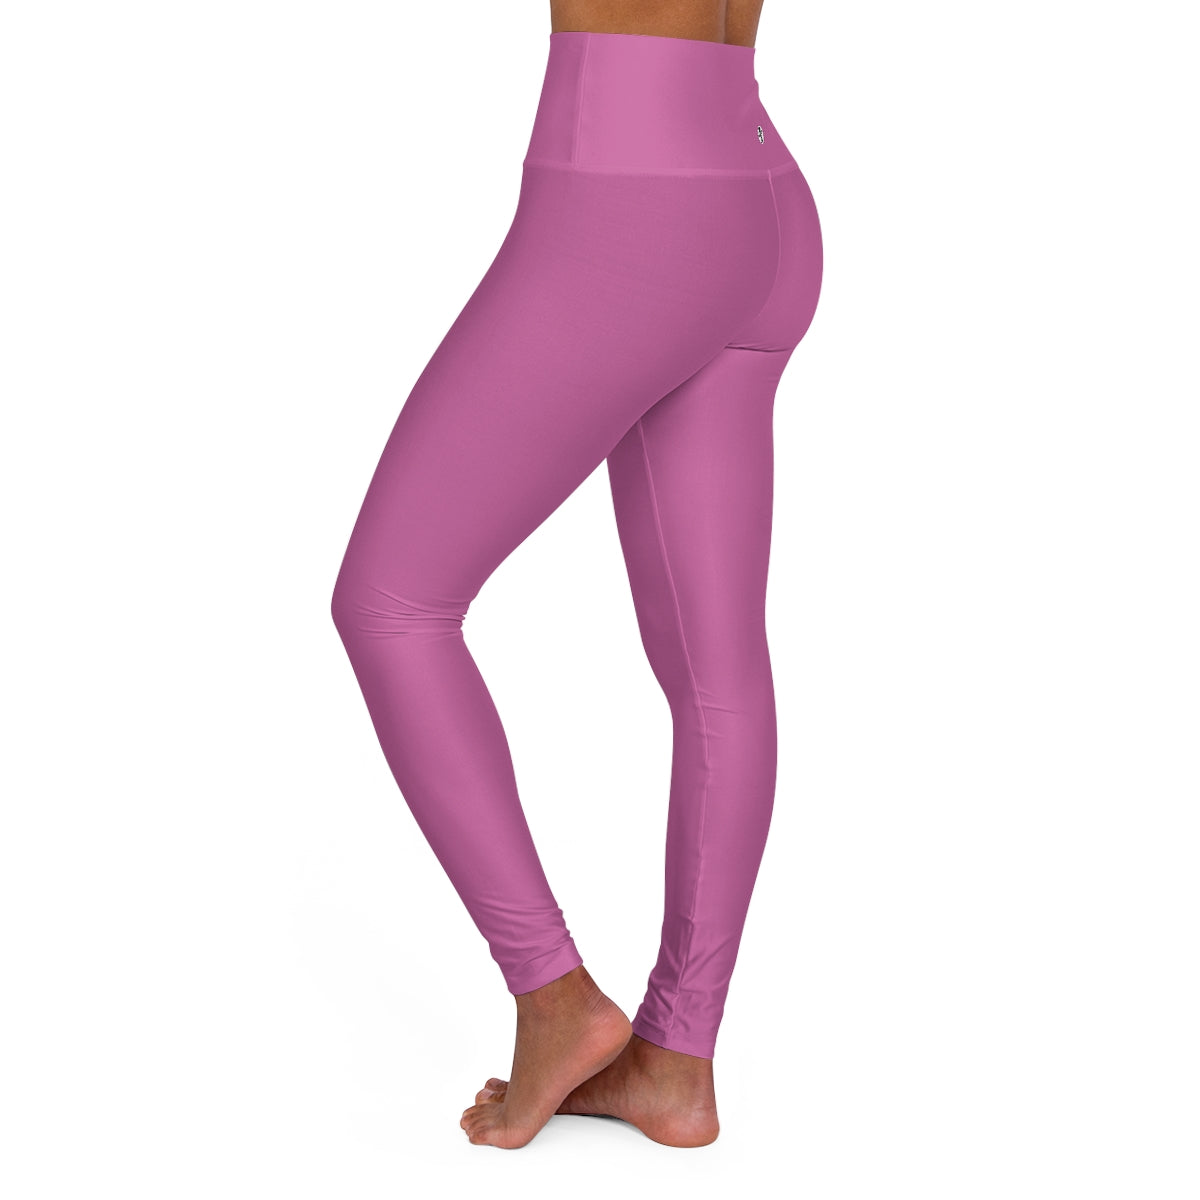 Active V Waist Bubblelime Yoga Pants For Tight Sports And Running From  Alexandbelly, $13.26